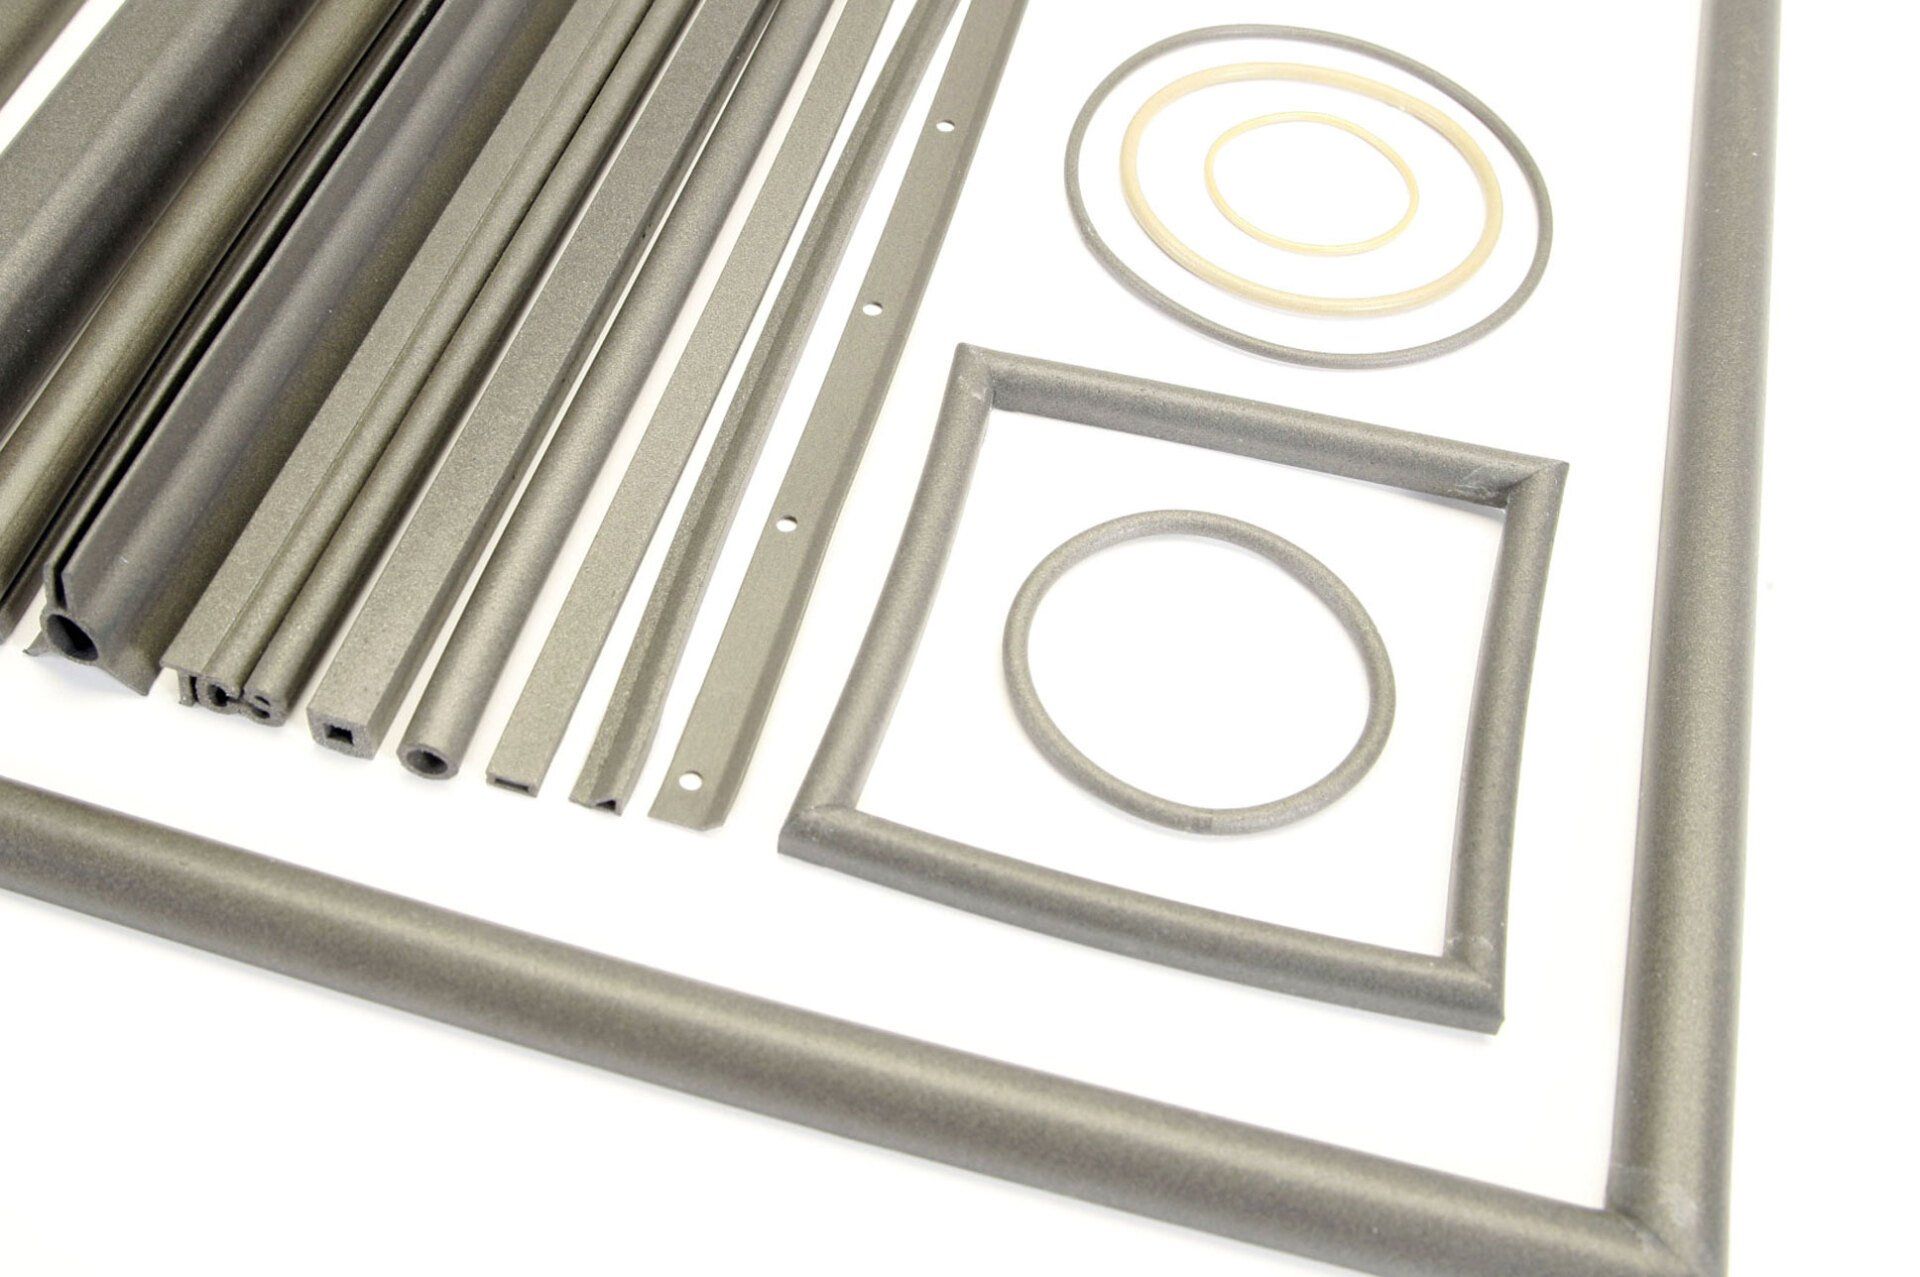 Extruded profiles,  Standard profiles,  Duo-seal,  Flame retardant,  Miniature o-rings,  TC Shielding,  TCS,  Conductive elastomer specialists,  Herefordshire,  conductive silicone manufacturers